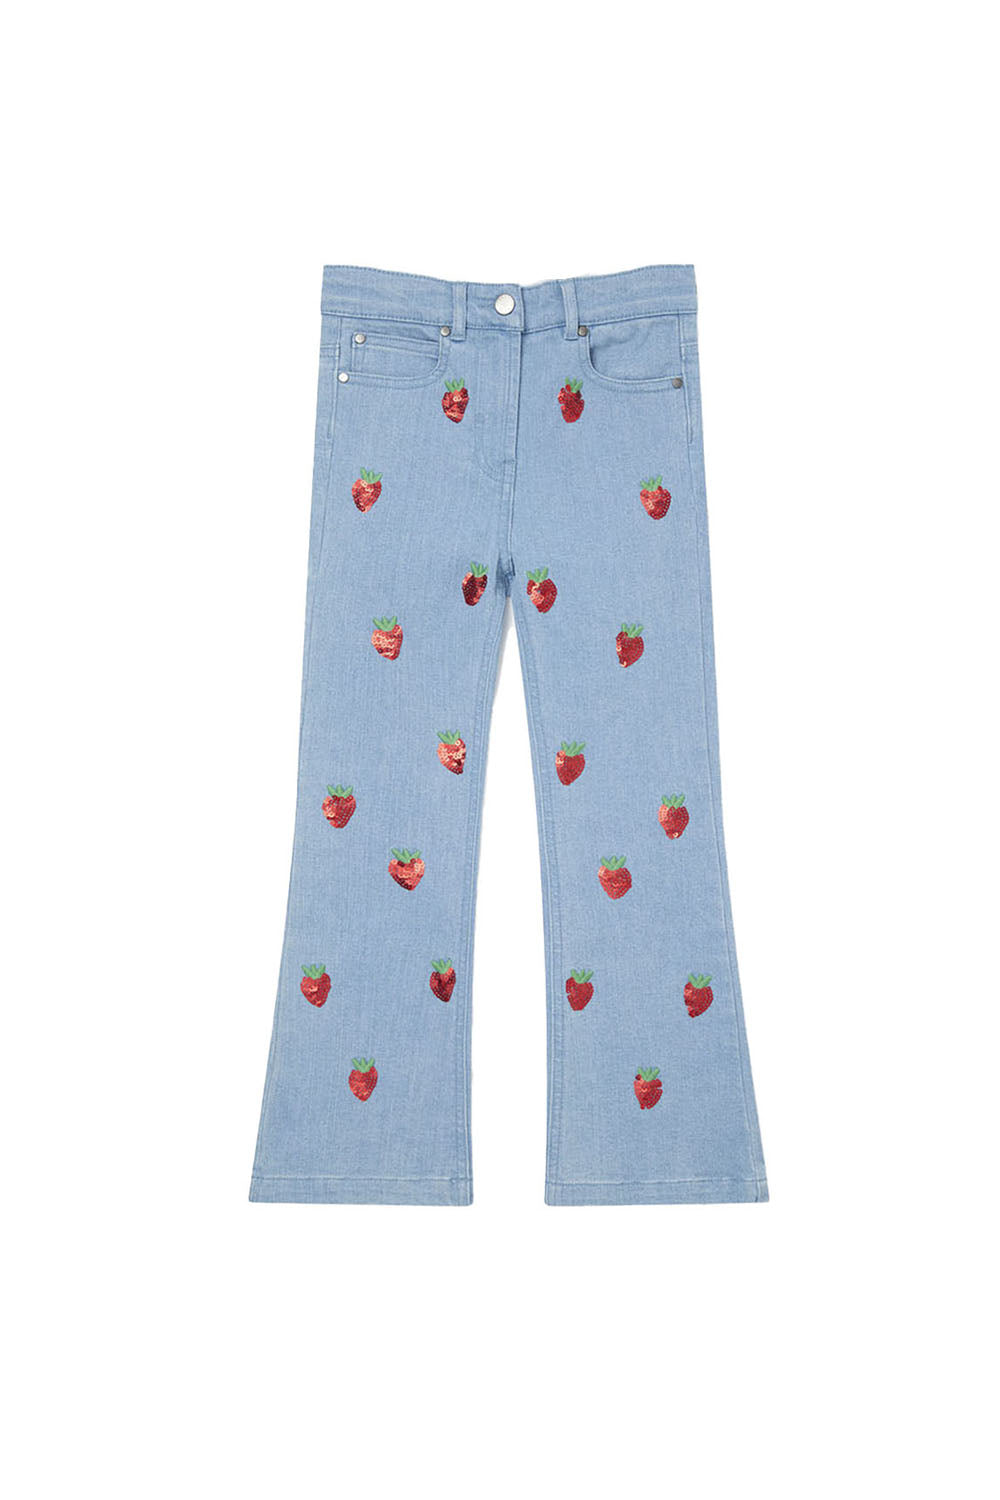 Sequins Strawberries Embro Flare Denim Trousers